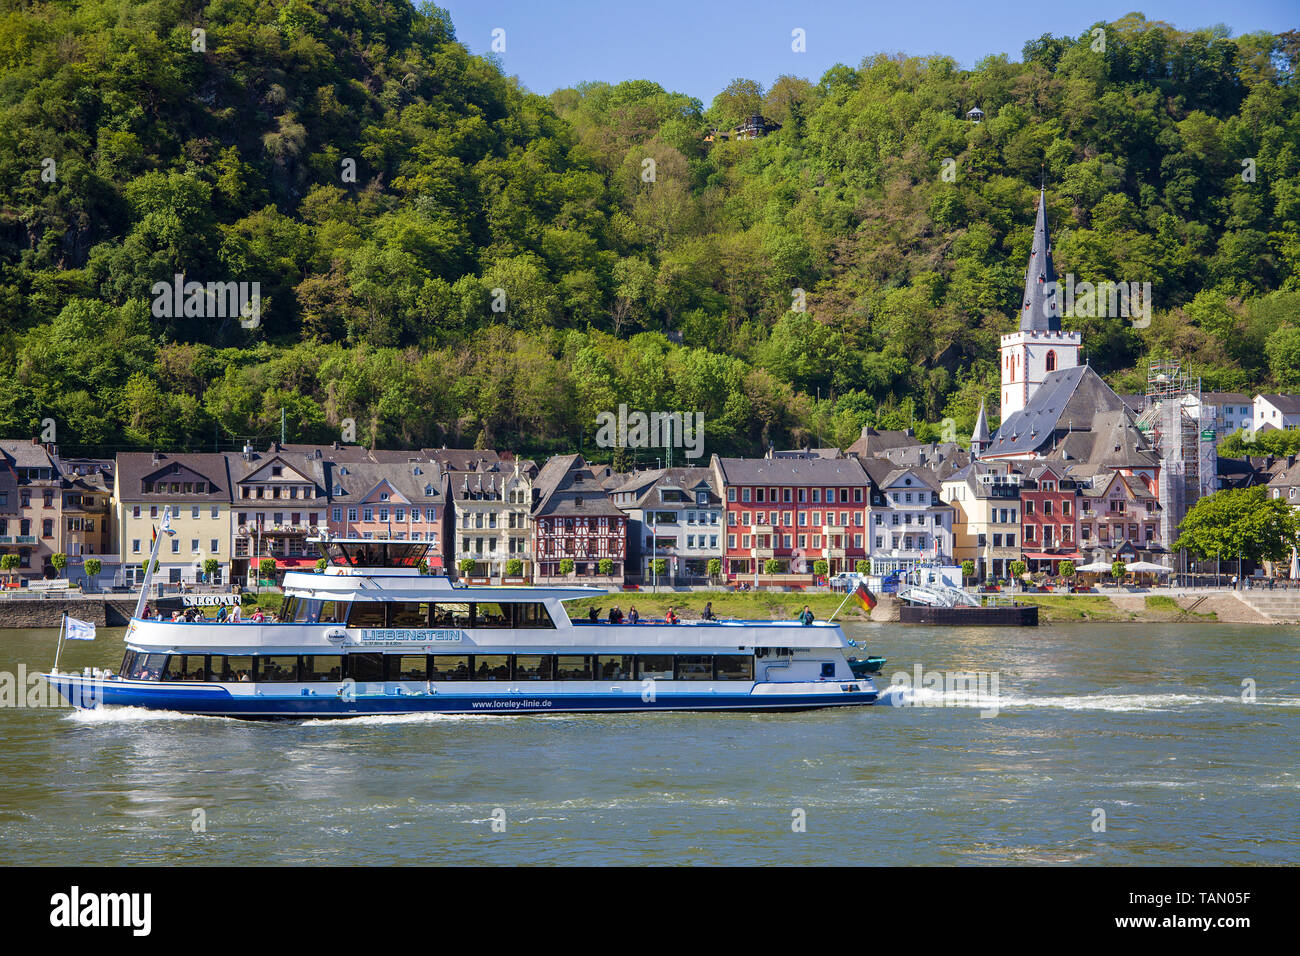 Excursion ship at St. Goarshausen, Unesco world heritage site, Upper Middle Rhine Valley, Rhineland-Palatinate, Germany Stock Photo